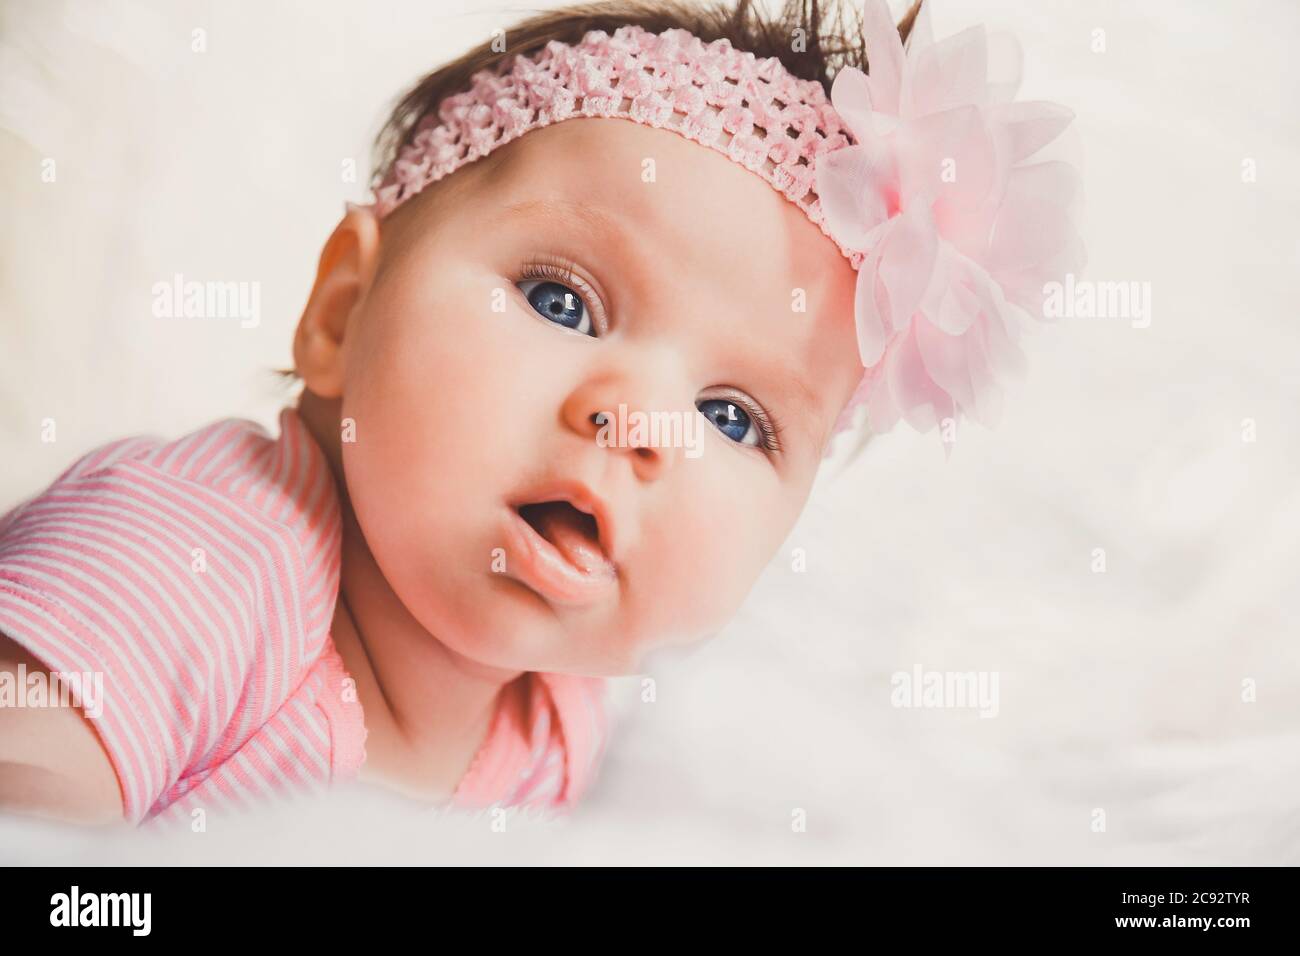 Close-up portrait of cute baby girl in pink lying down on a white bed. Looking at camera. Big open eyes. Healthy little kid shortly after birth. Stock Photo